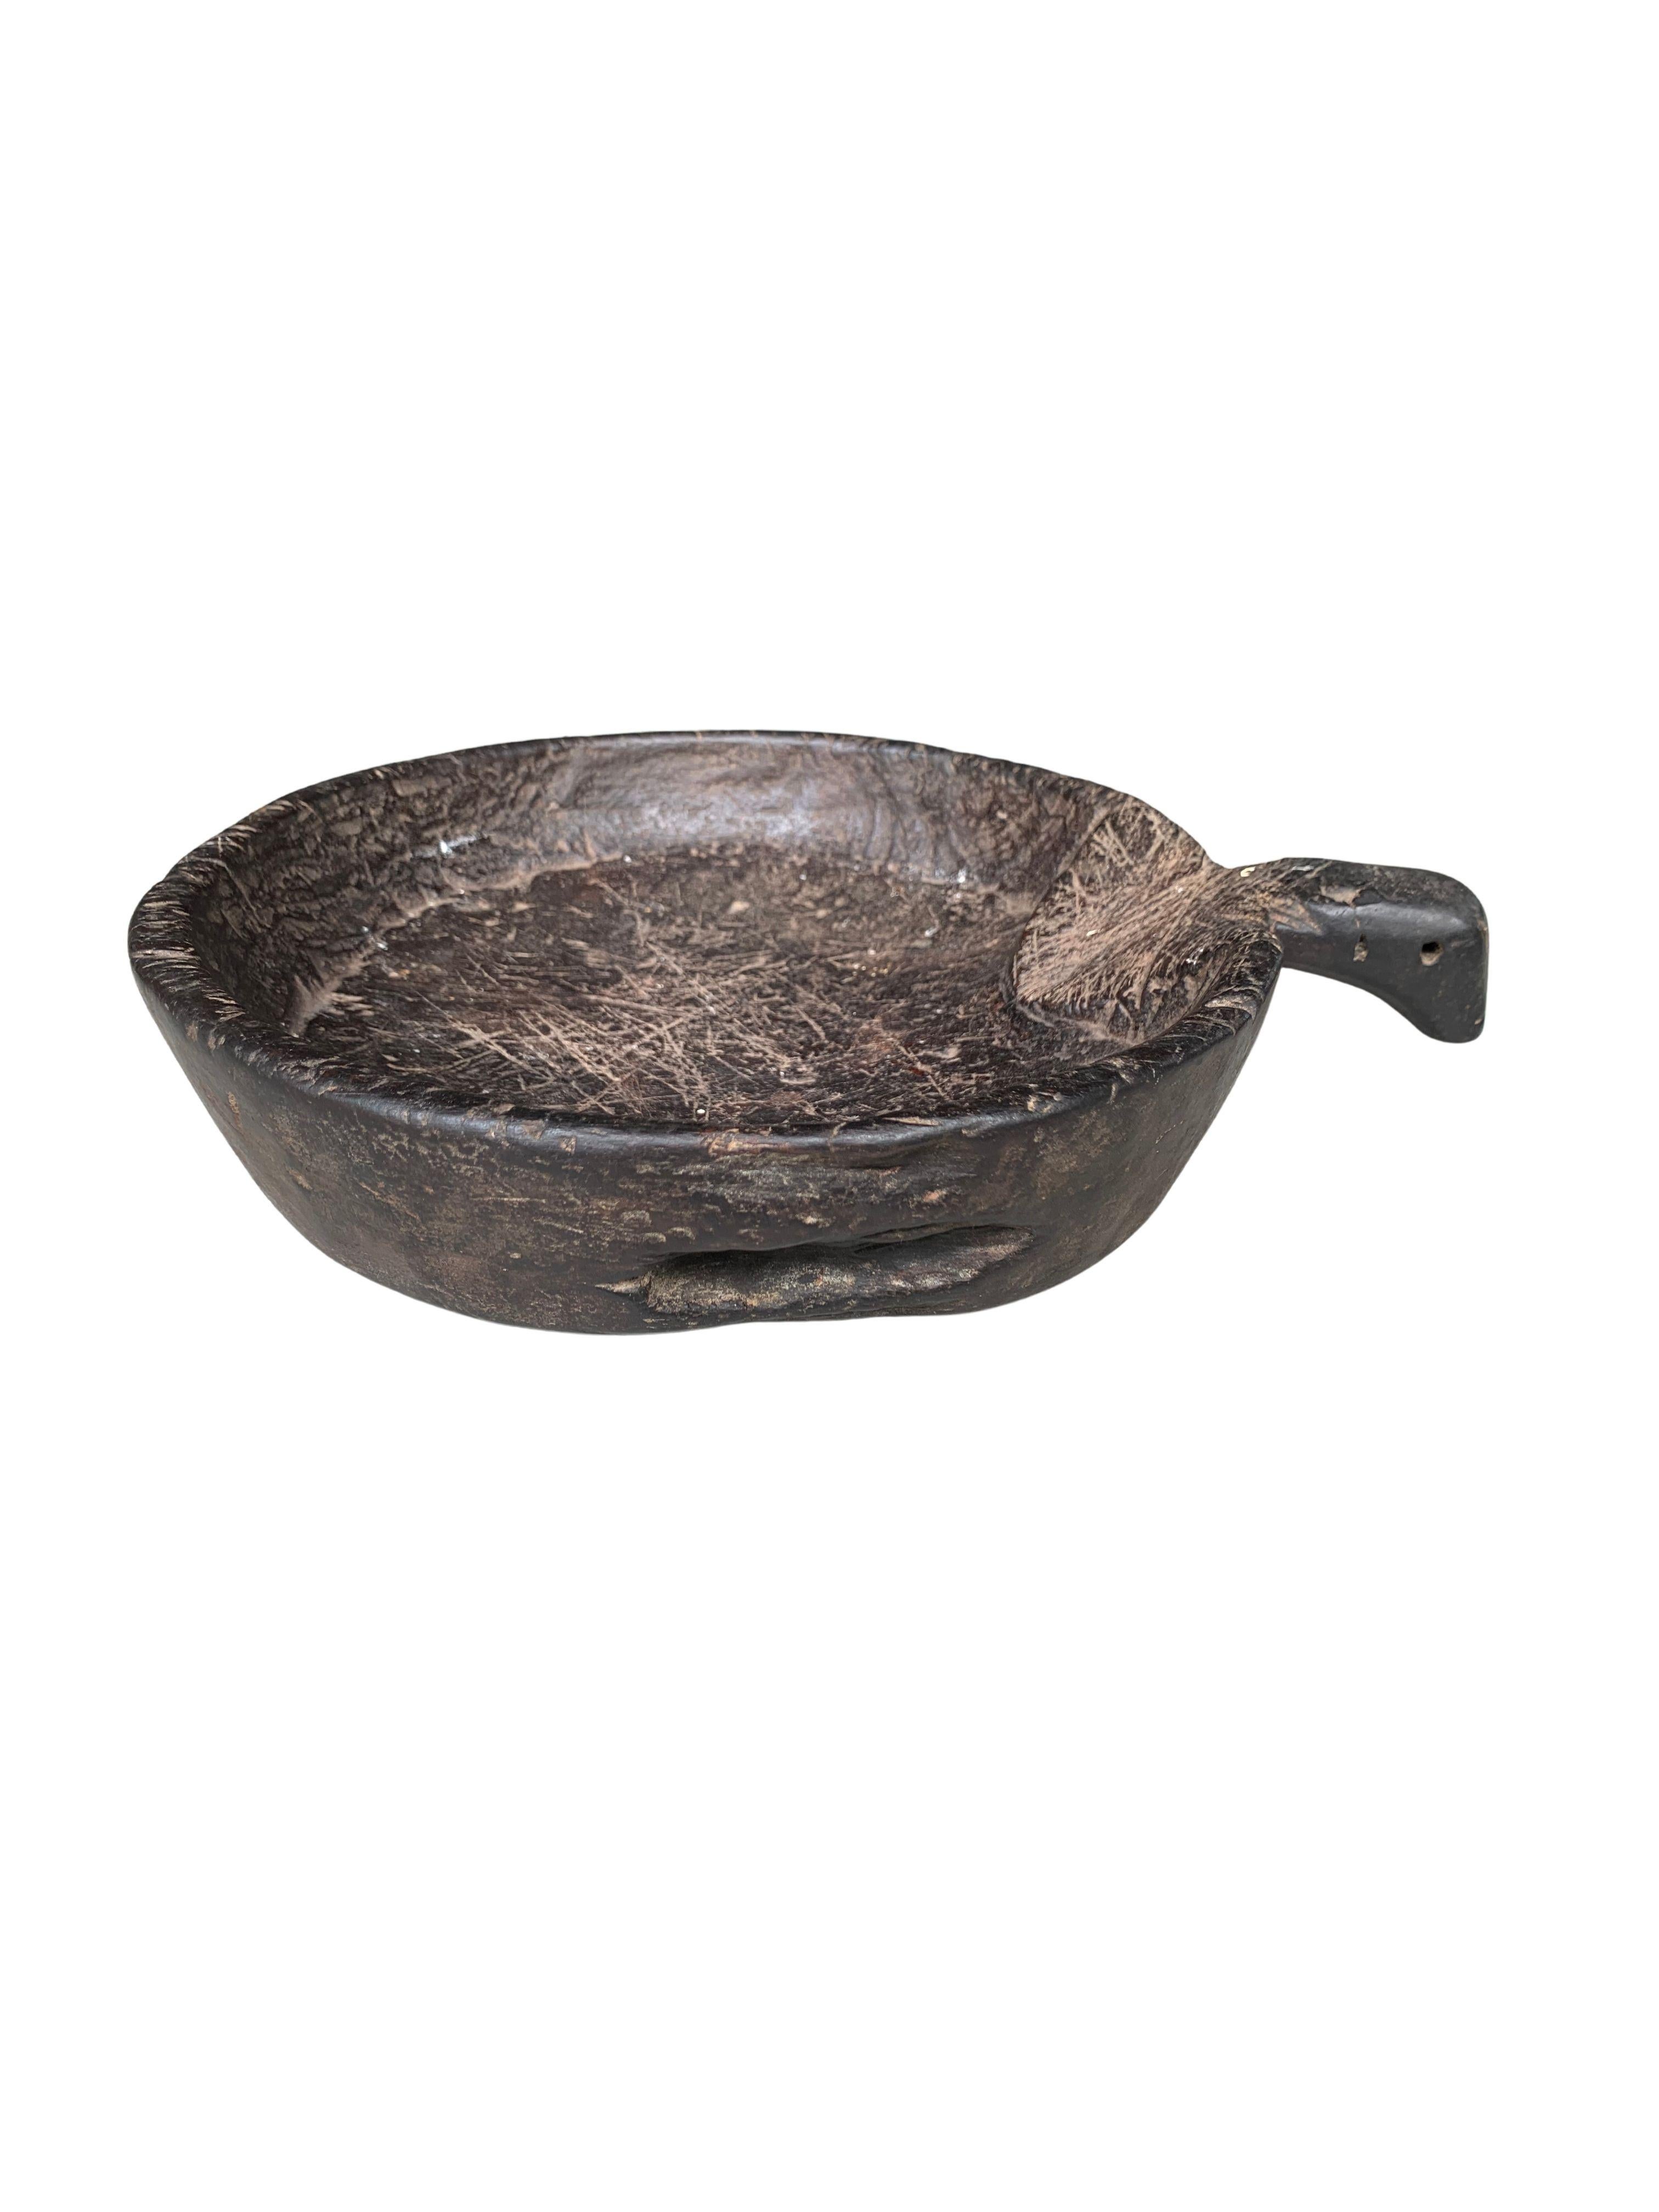 Crafted from ironwood this Mentawai tribe bowl features a handle and subtle wood detailing. A wonderful decorative bowl or table centrepiece certain to invoke conversation. The Mentawai tribes are situated on a series of islands off the western